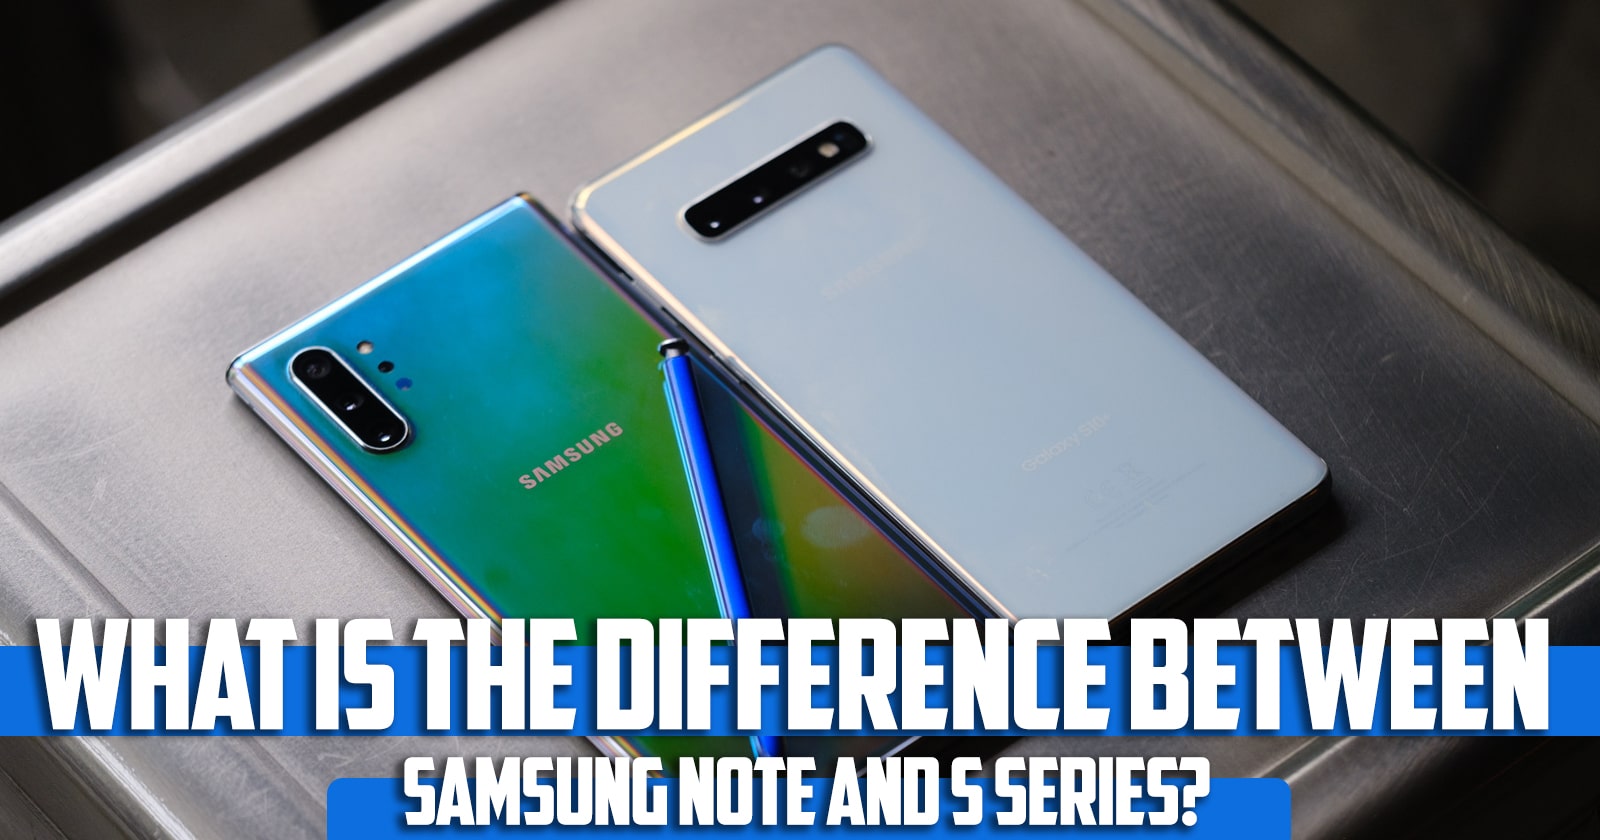 What is the difference between Samsung note and s series?